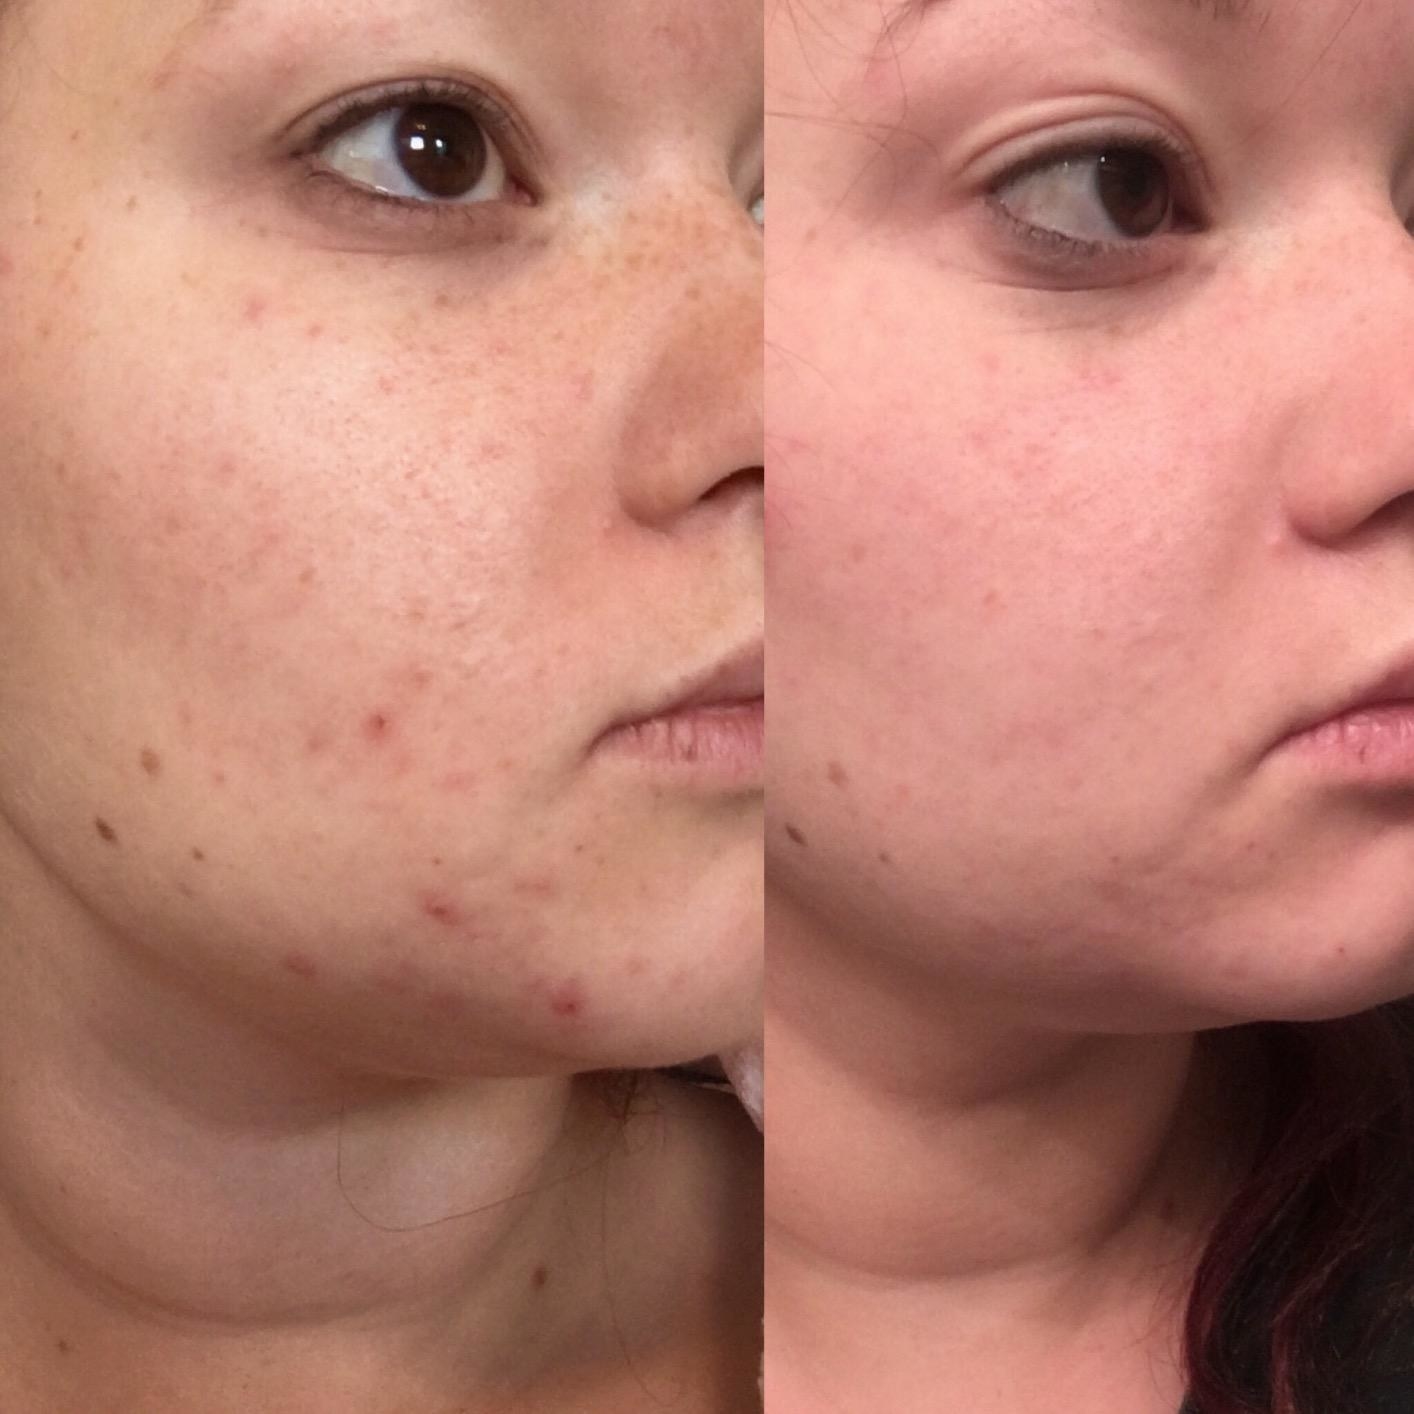 on the left reviewer with a few breakouts, on the right the same reviewer with no breakouts